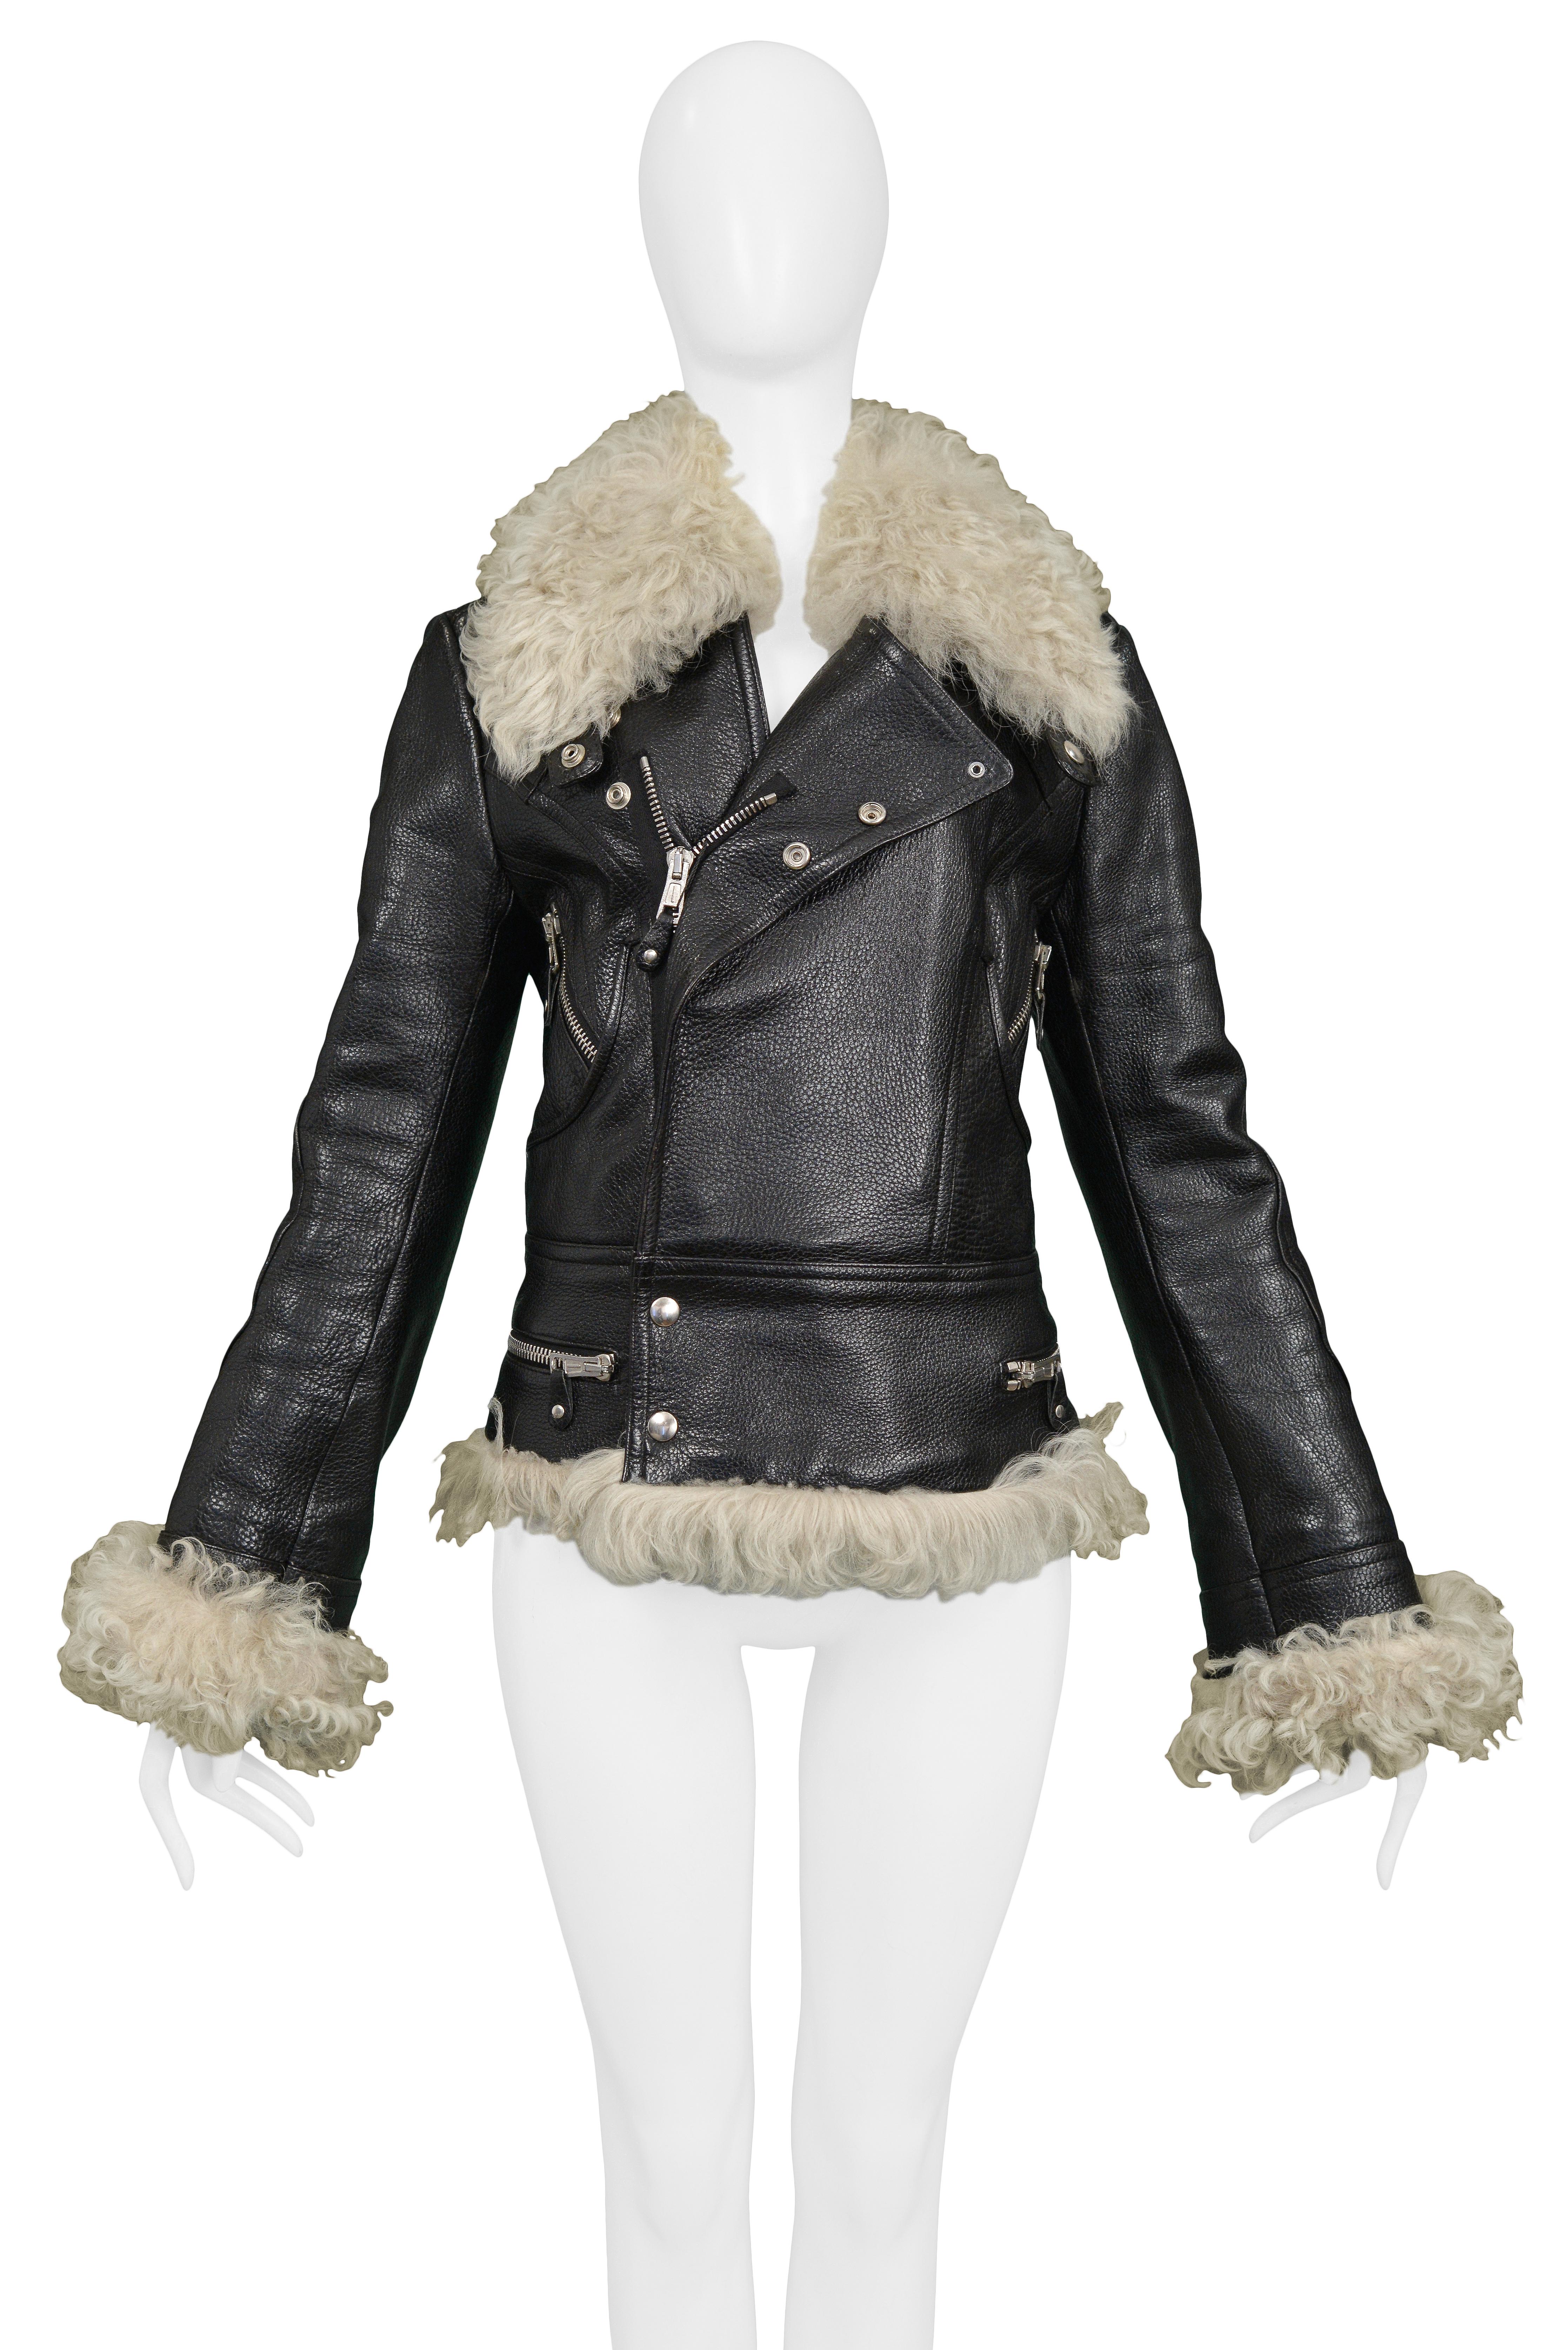 Resurrection Vintage is excited to offer an iconic vintage black leather Balenciaga by Nicolas Ghesquiere motorcycle jacket featuring a curly fur trim collar, cuffs, and hem, silver zippers and snaps, and fully lined.  

Balenciaga Paris
Designed by